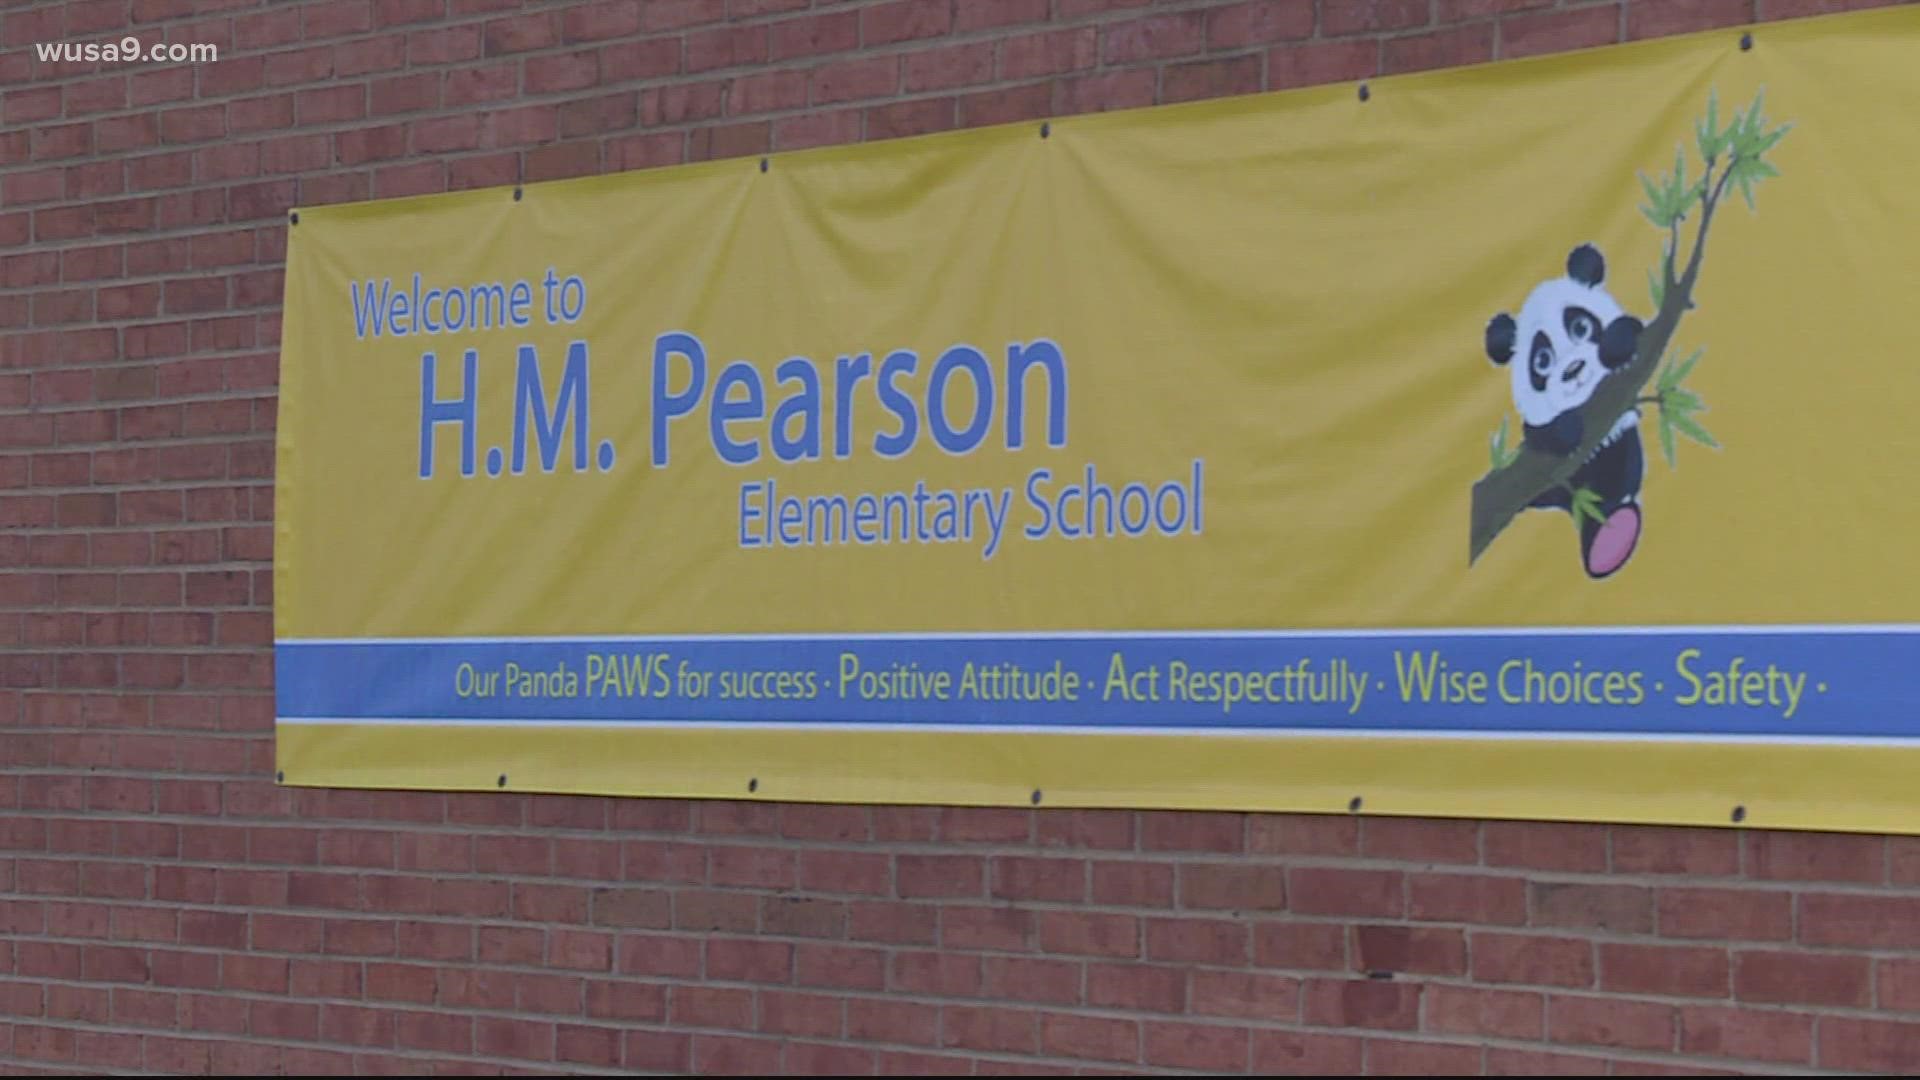 A music teacher at H.M. Pearson Elementary School allegedly used a belt to restrain a 7-year-old student in class last week.